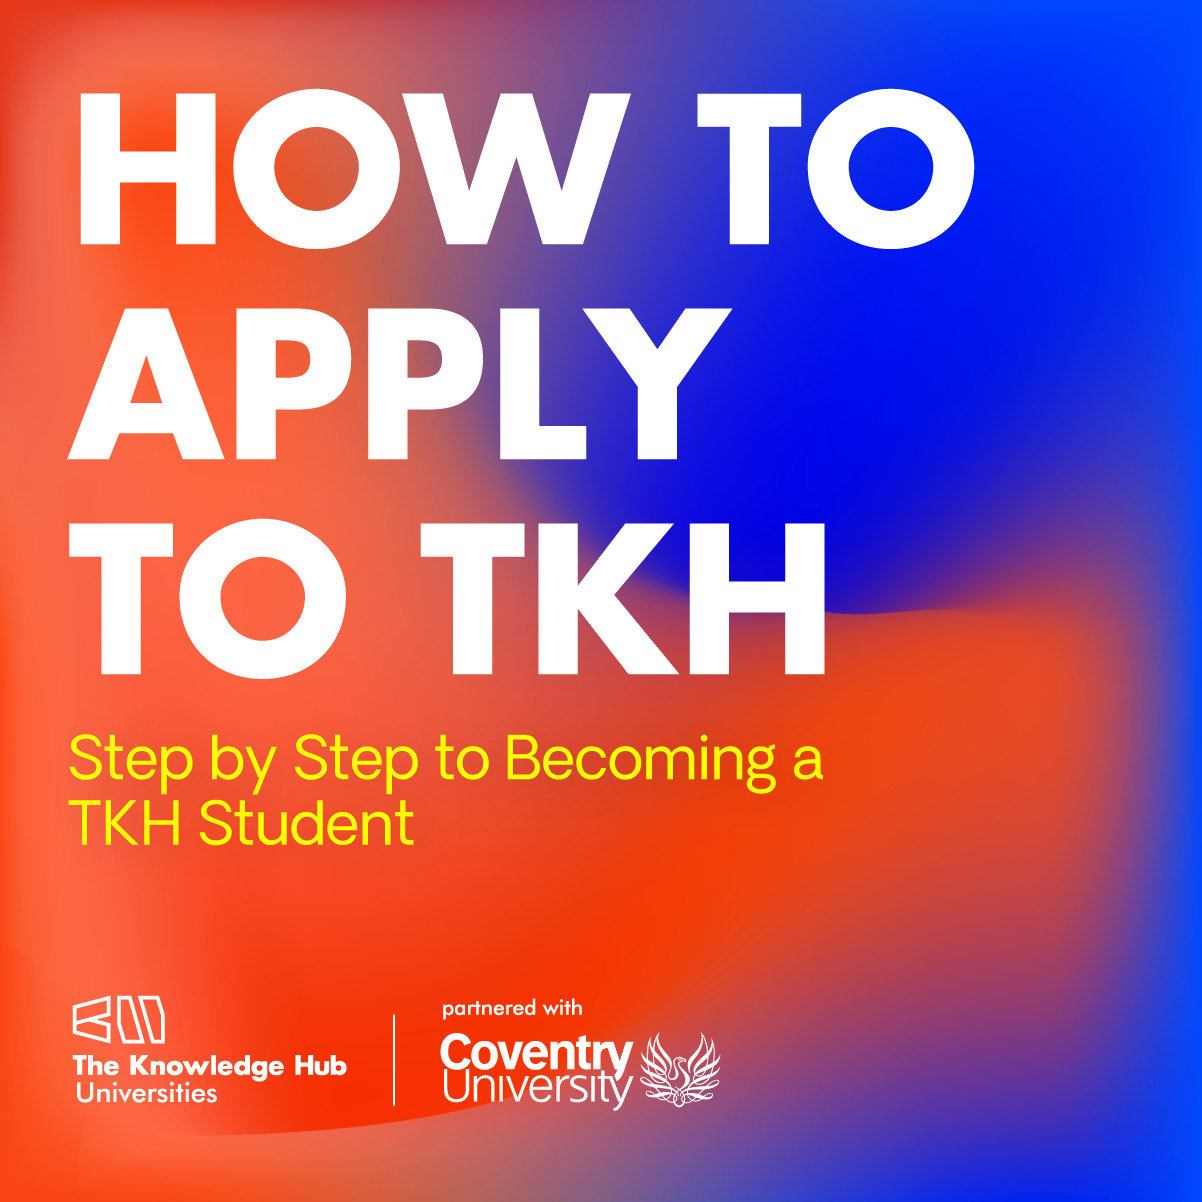 How to apply?